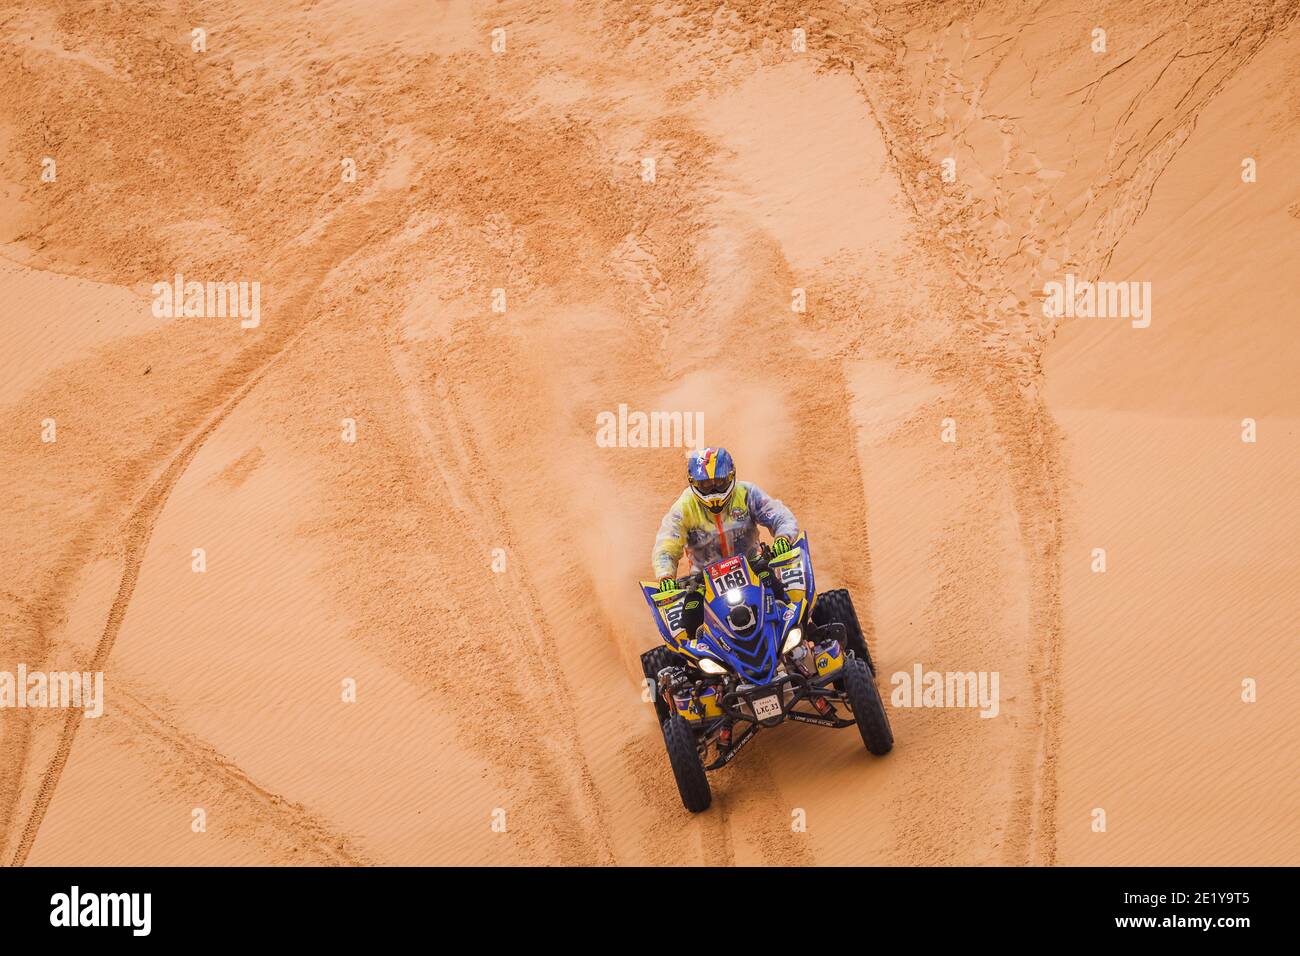 168 Pedemonte Italo (chl), Yamaha, Enrico Racing Team, Quad, action during the 7th stage of the Dakar 2021 between Ha&#039;il and Sakaka, in Saudi Arabia on January 10, 2021 - Photo FrÃ©dÃ©ric Le Floc&#039;h / DPPI / LM Stock Photo